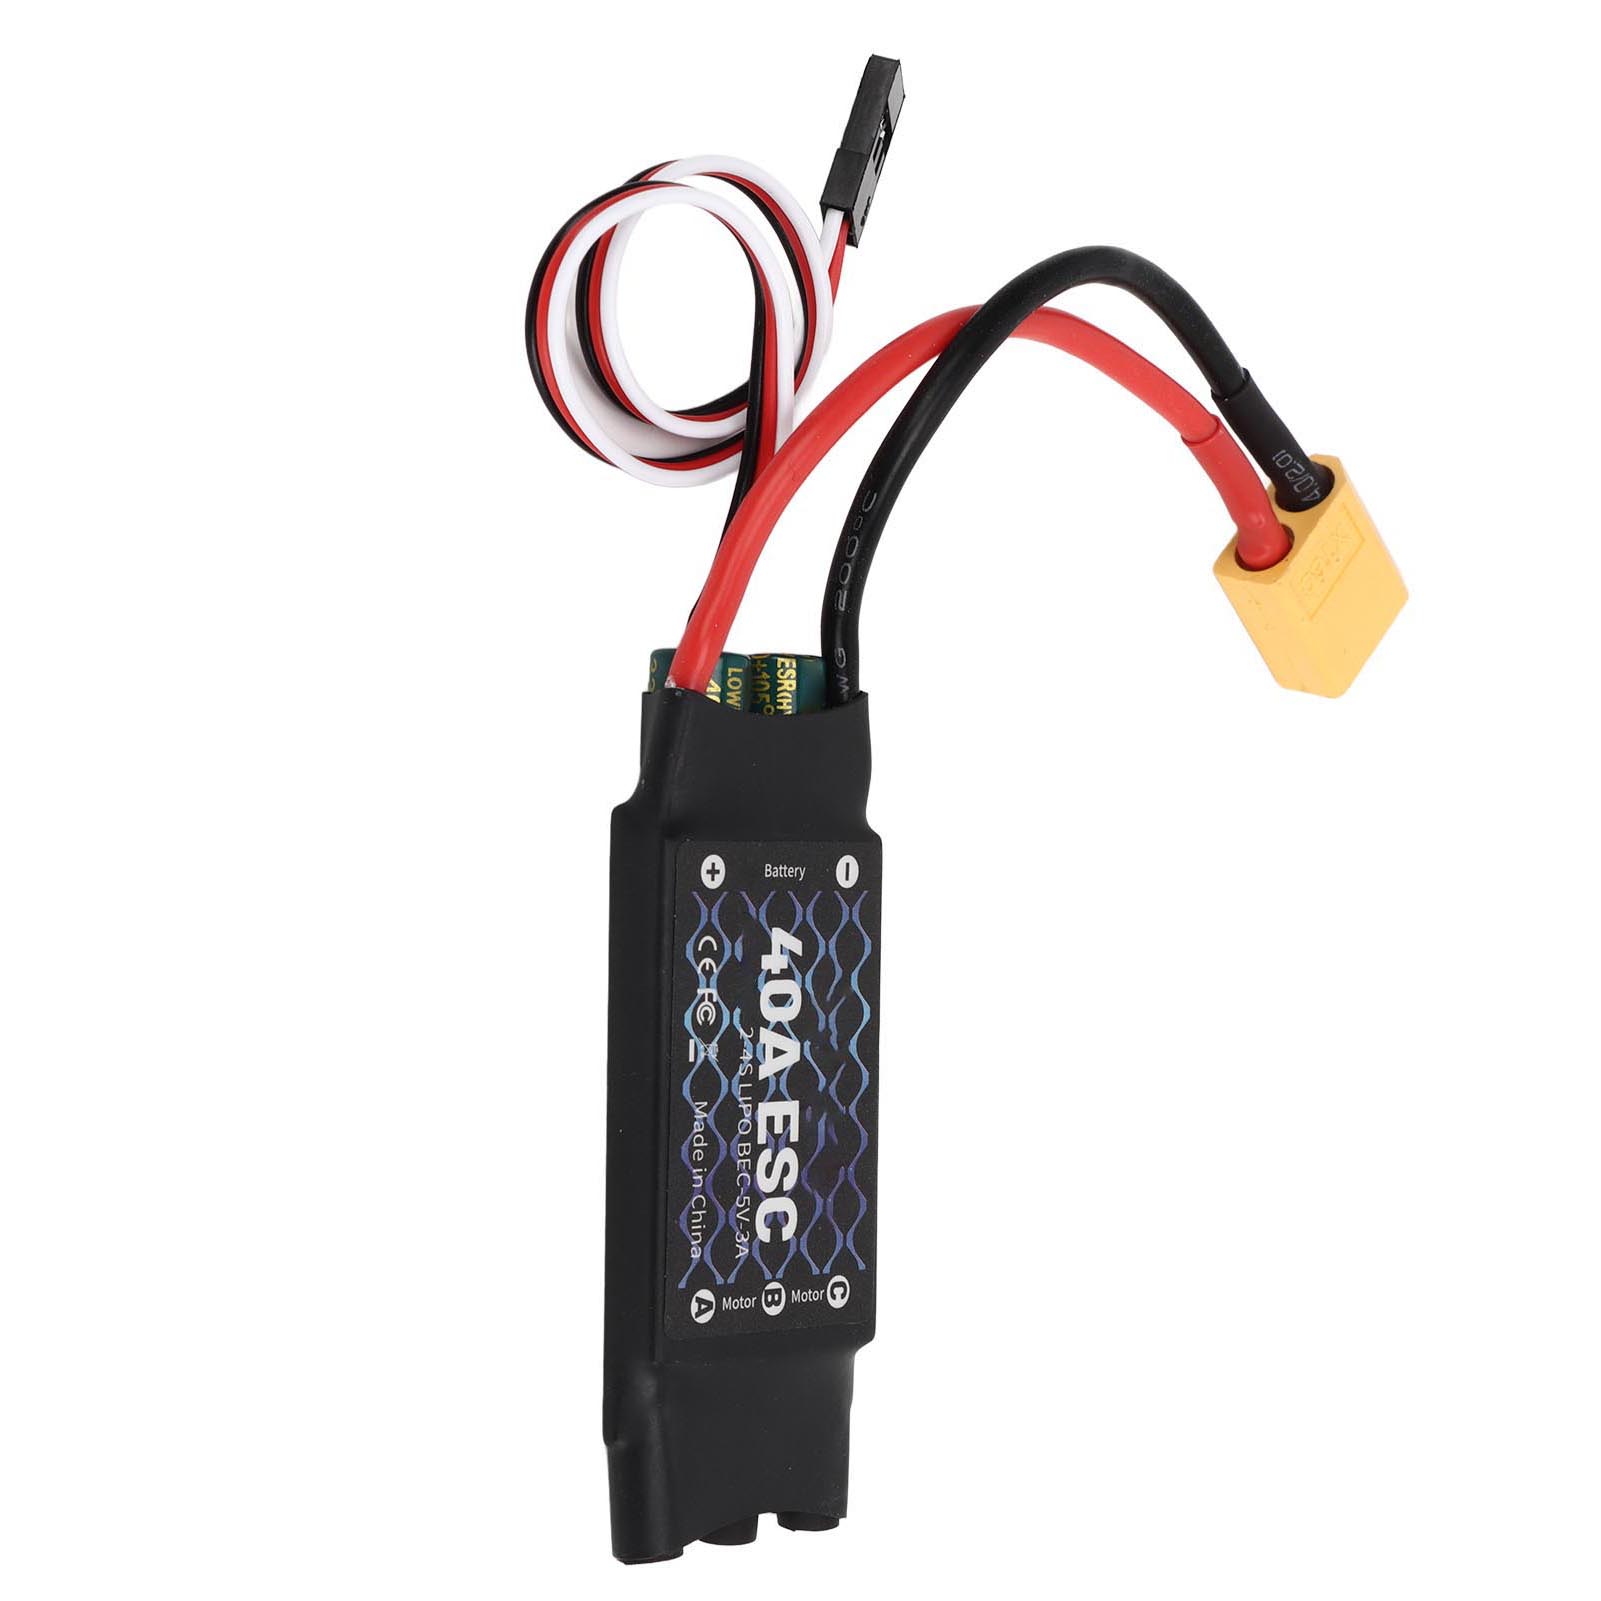 RC Drone Brushless ESC, 40A ESC Safe Power On Interference Resistant 5V 3A BEC 2-4S Ultra Low Impedance With XT60 Plug For Motor